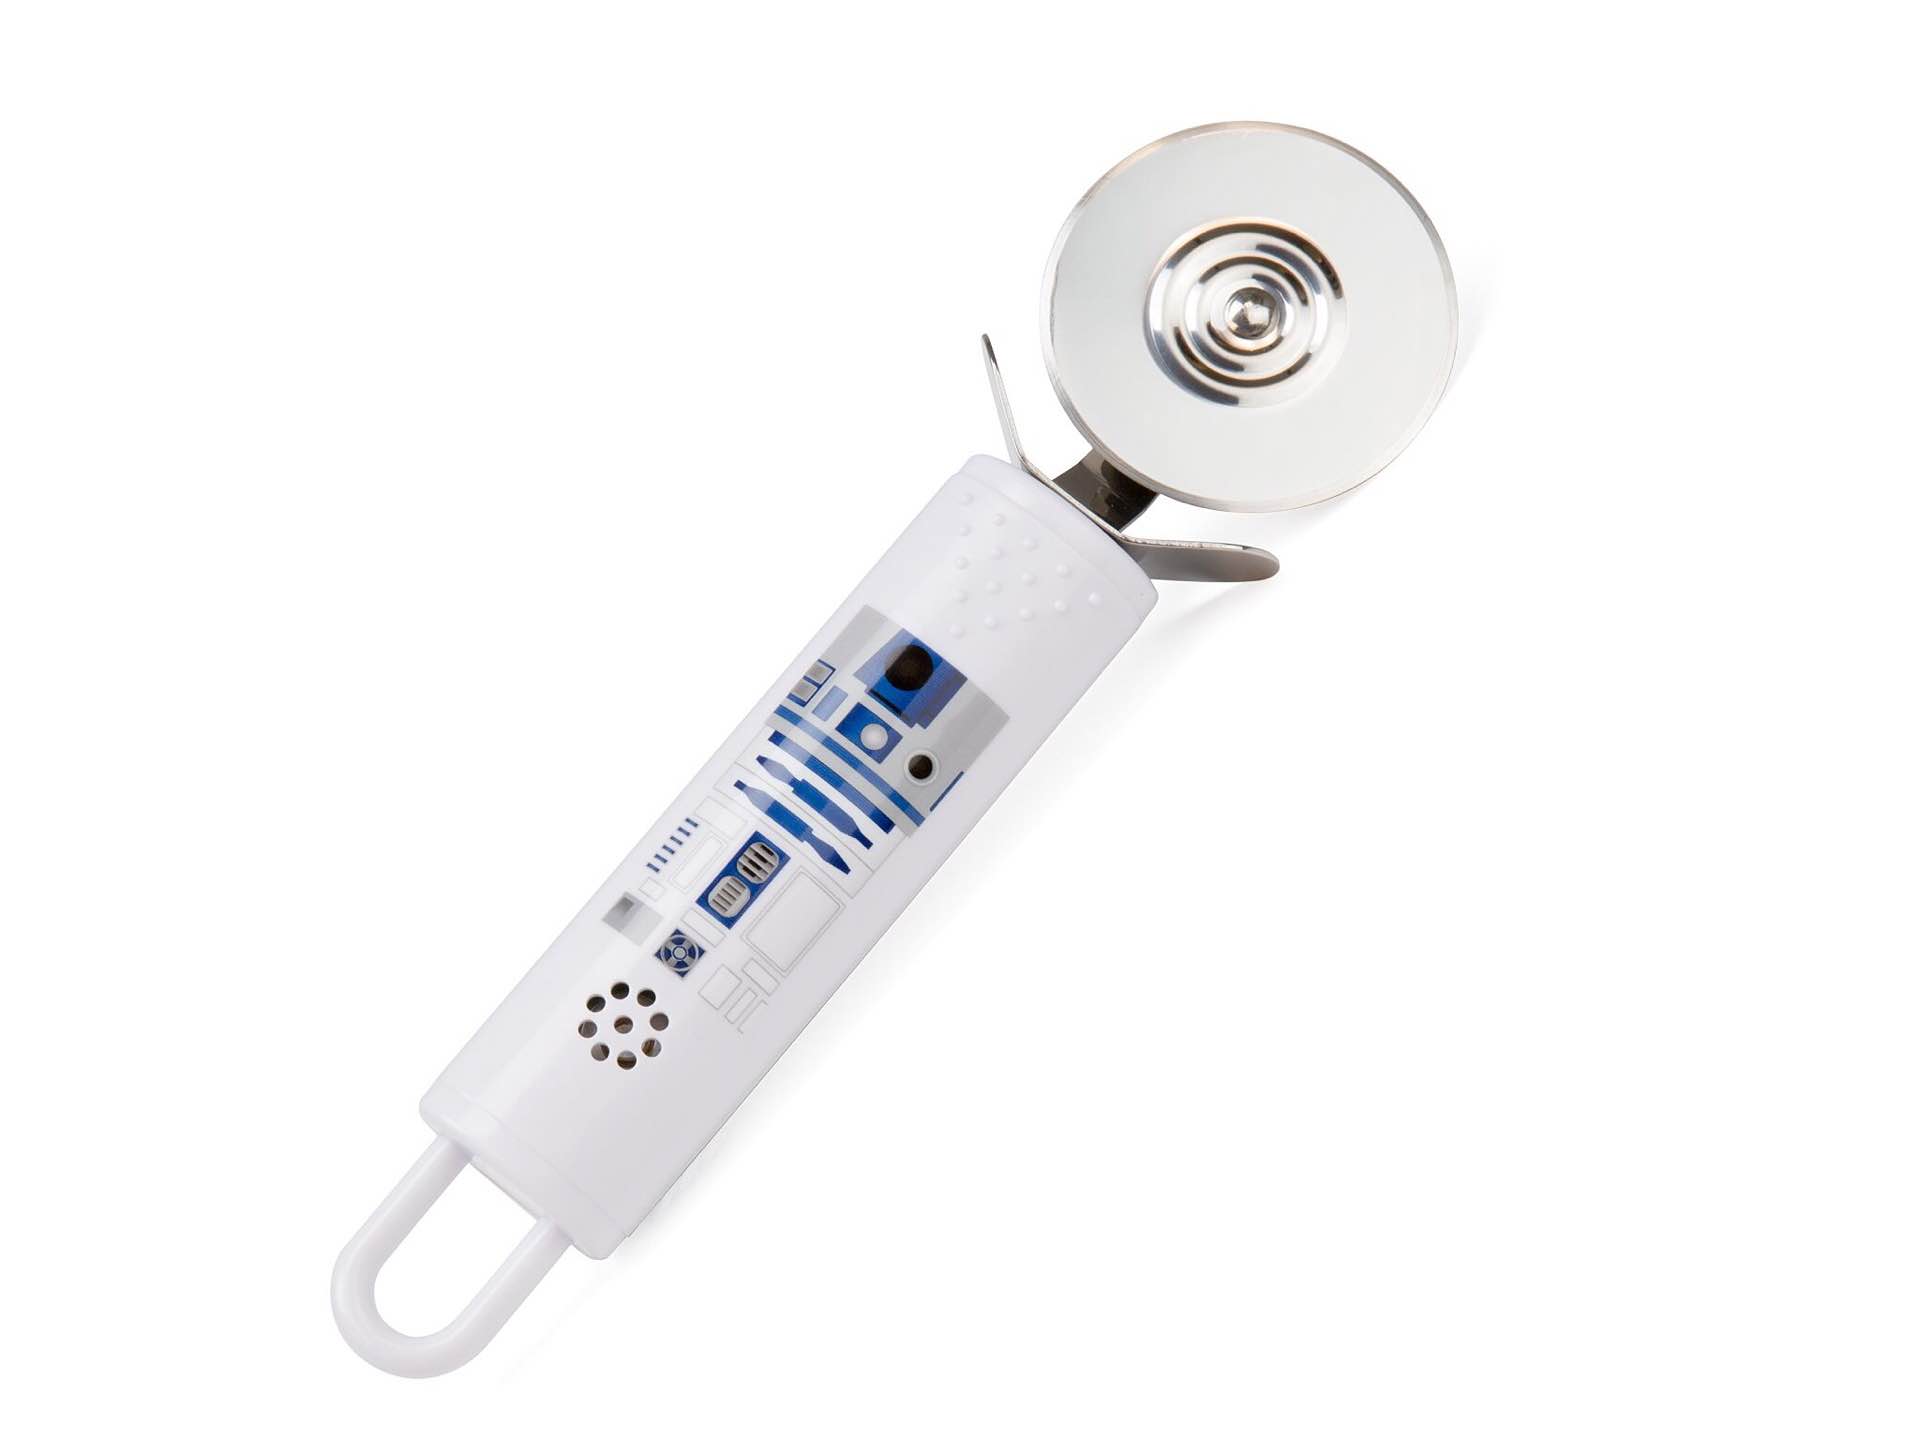 Star Wars R2-D2 pizza cutter with sound effects. (from $36 via third-party sellers)